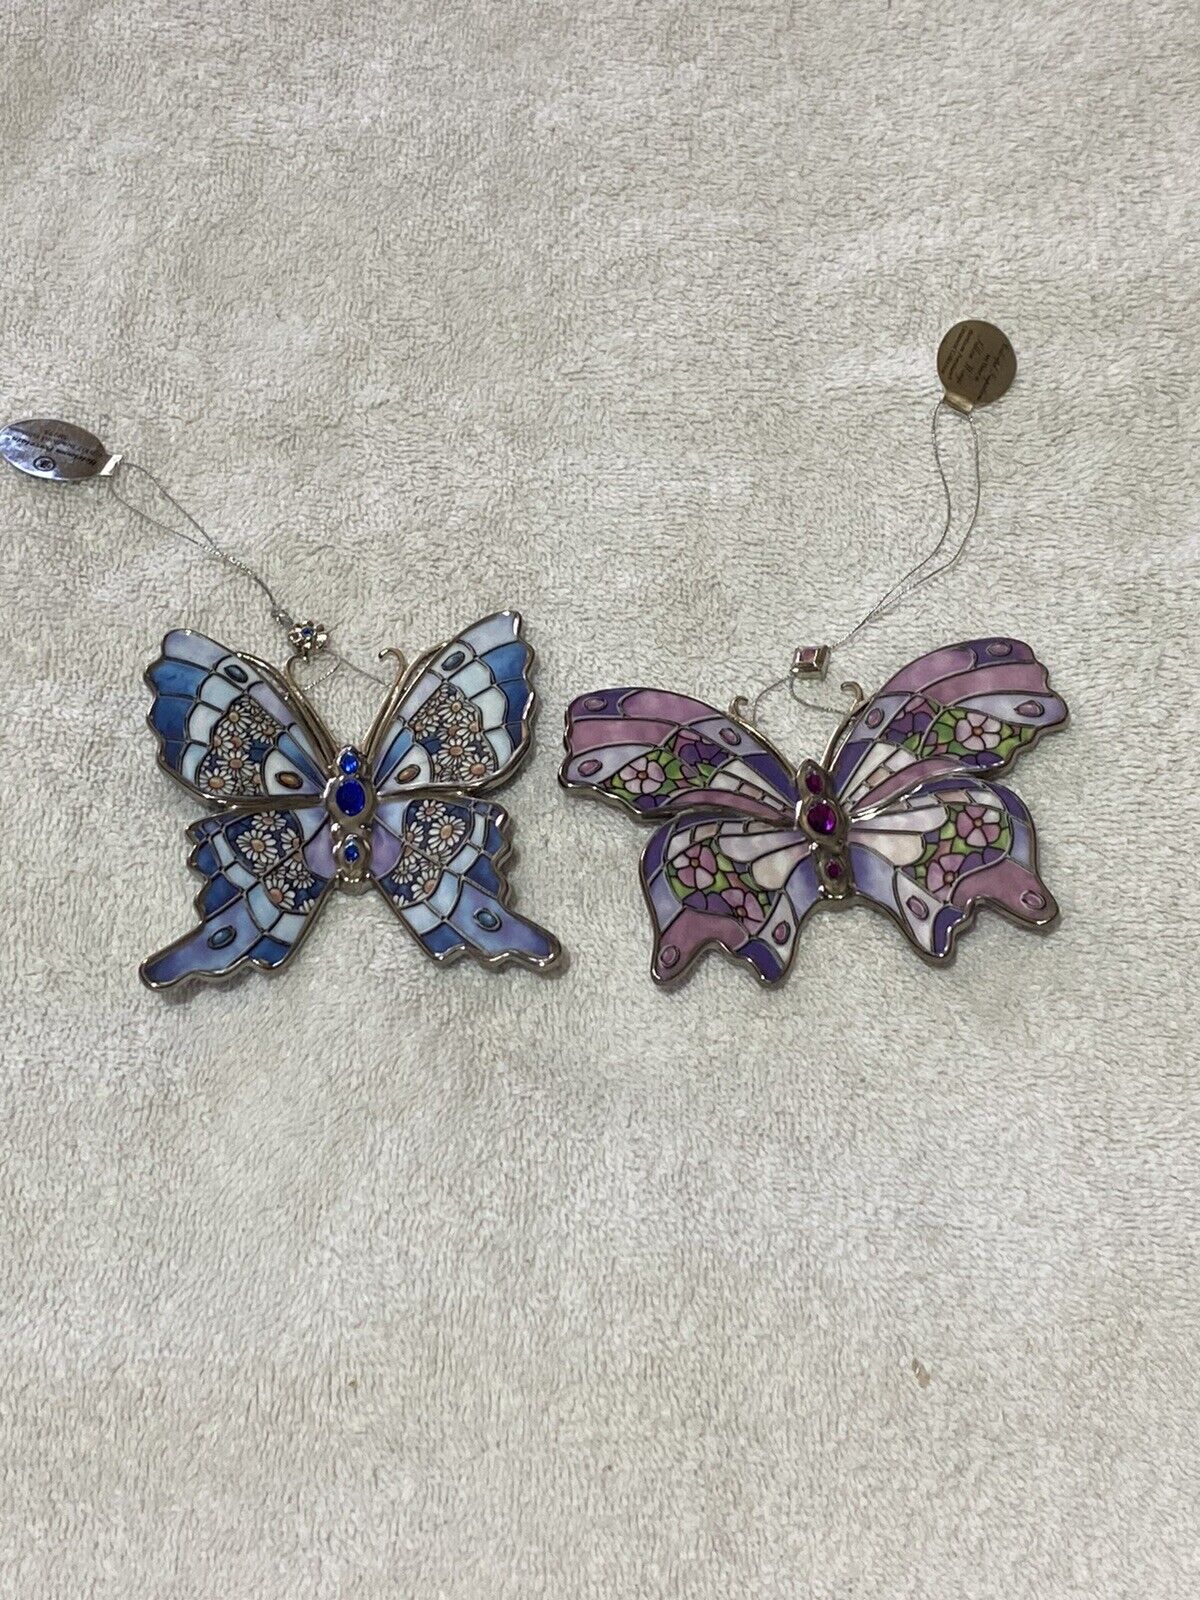 The Bradford Editions Silken Wings Heirloom Porcelain Ornament Collection Set 2